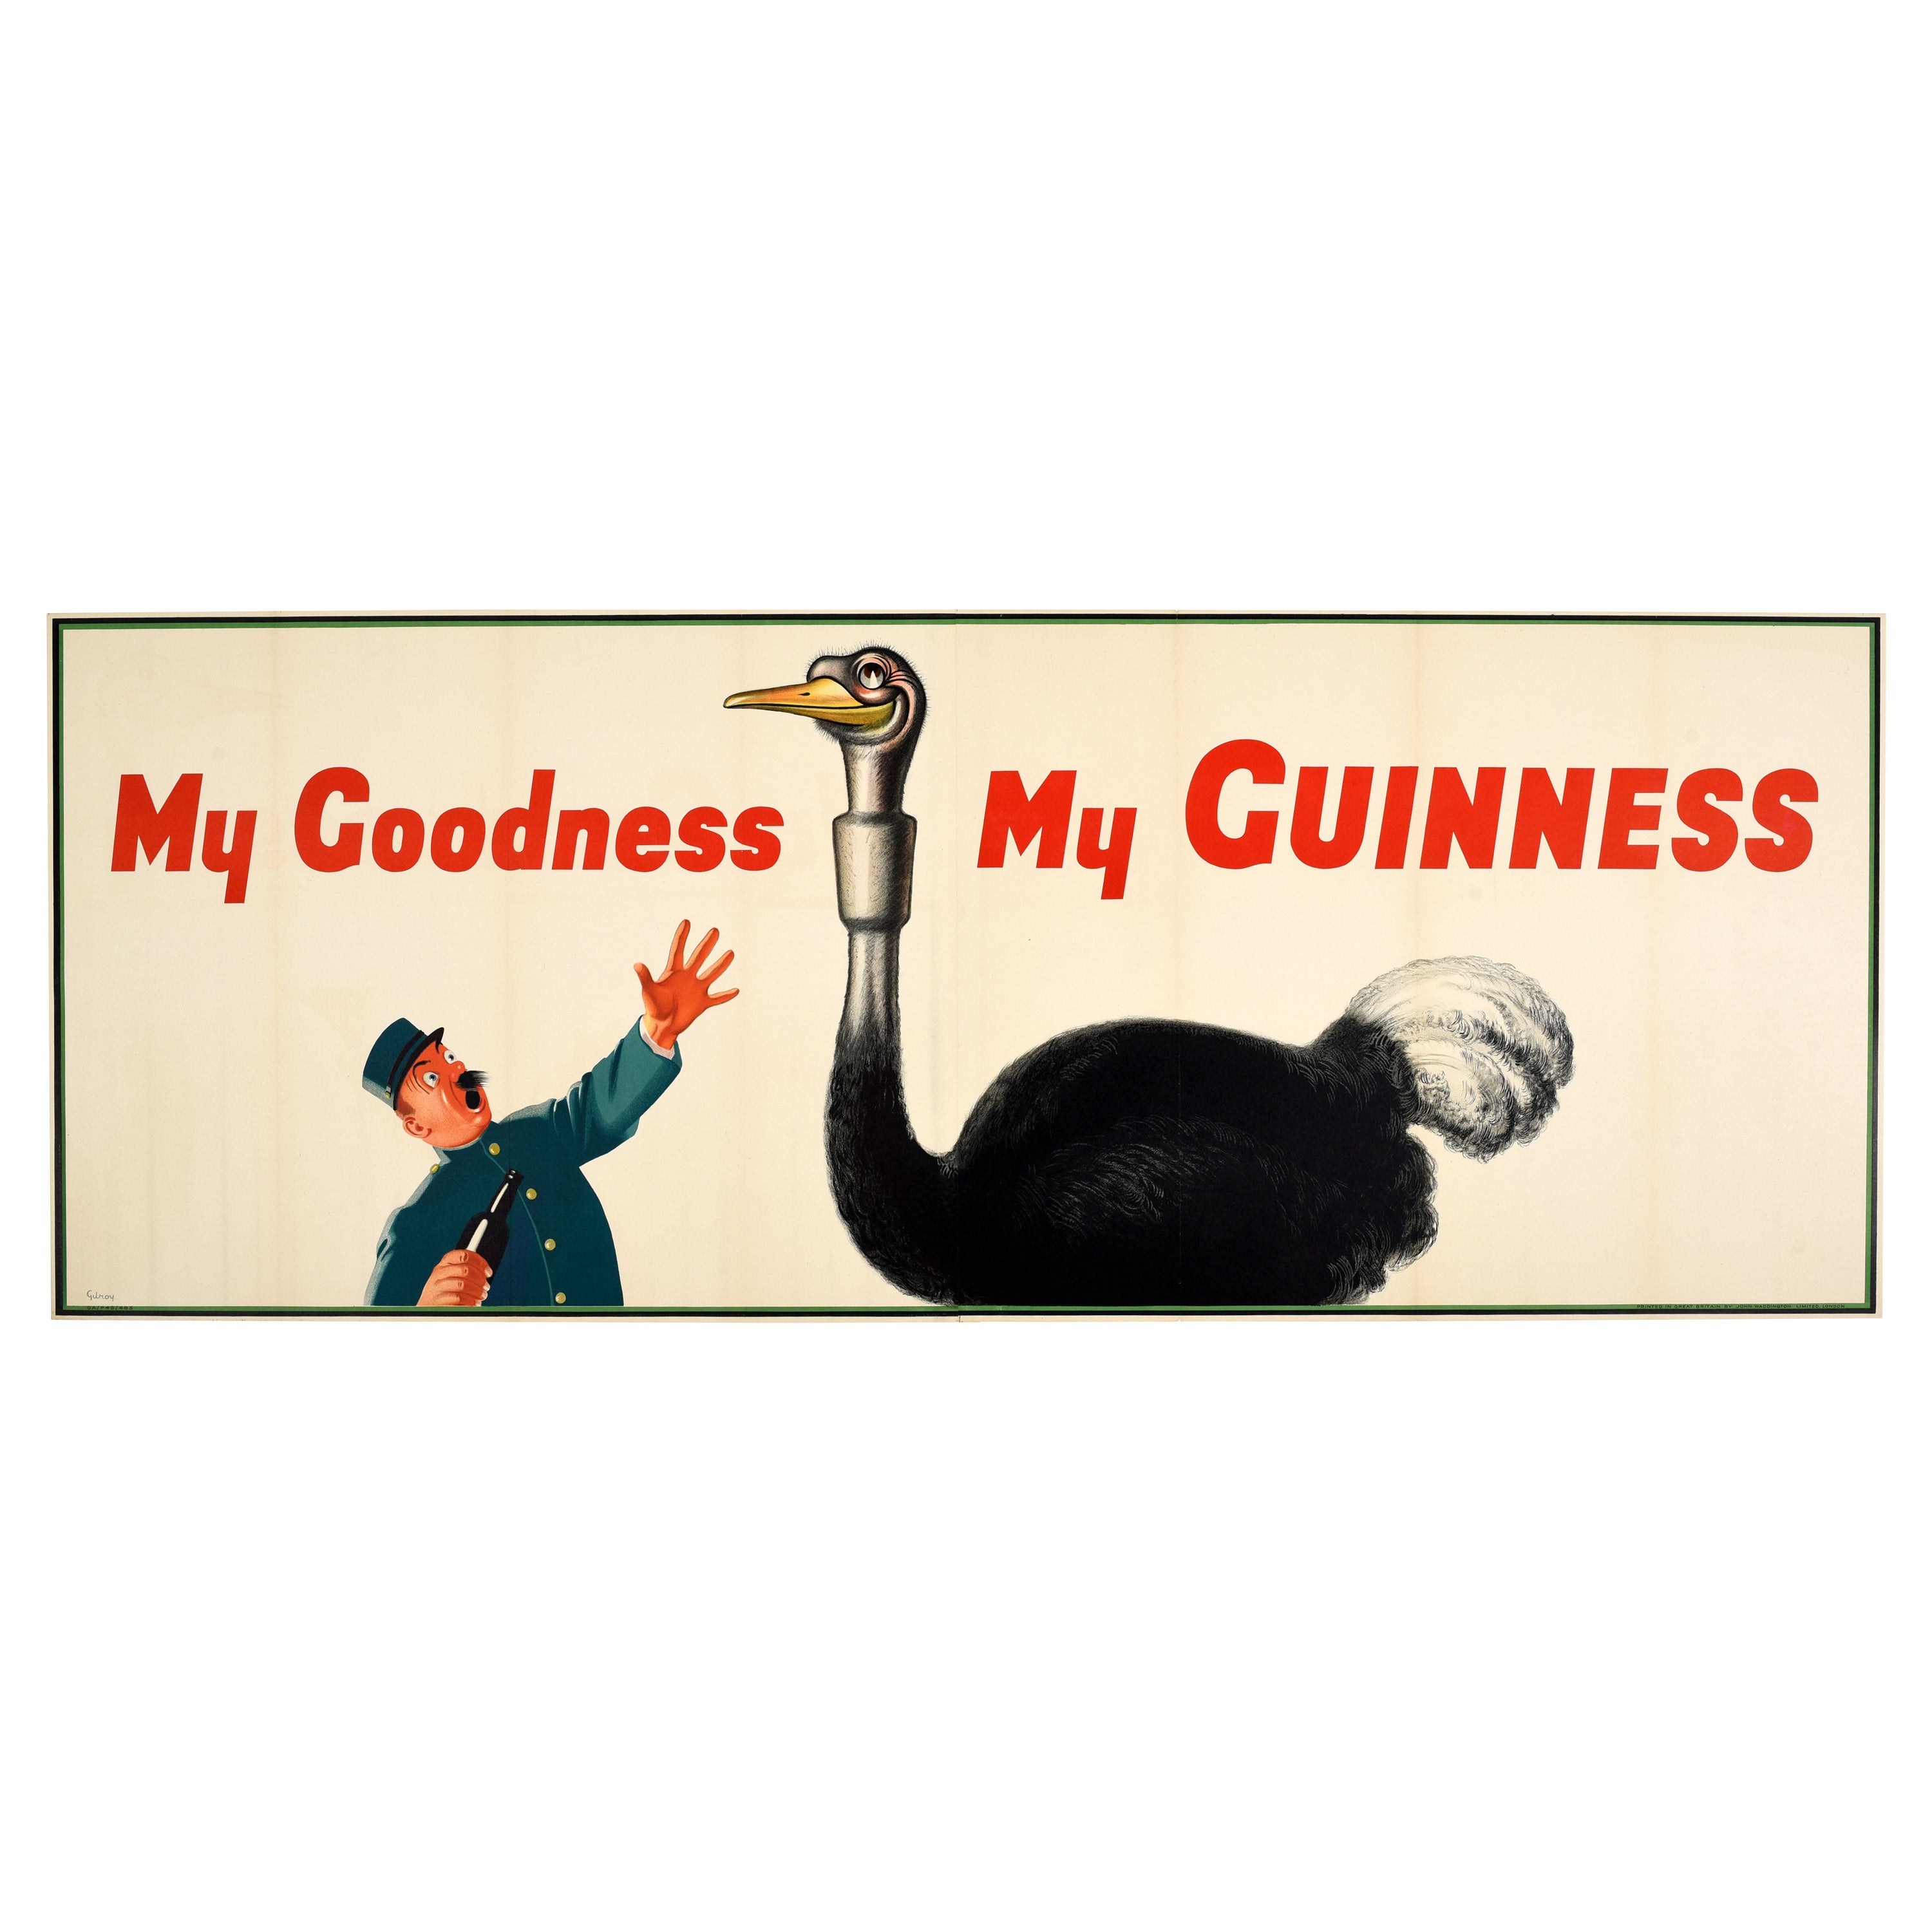 Original Vintage Drink Advertising Poster My Goodness My Guinness Ostrich Design For Sale